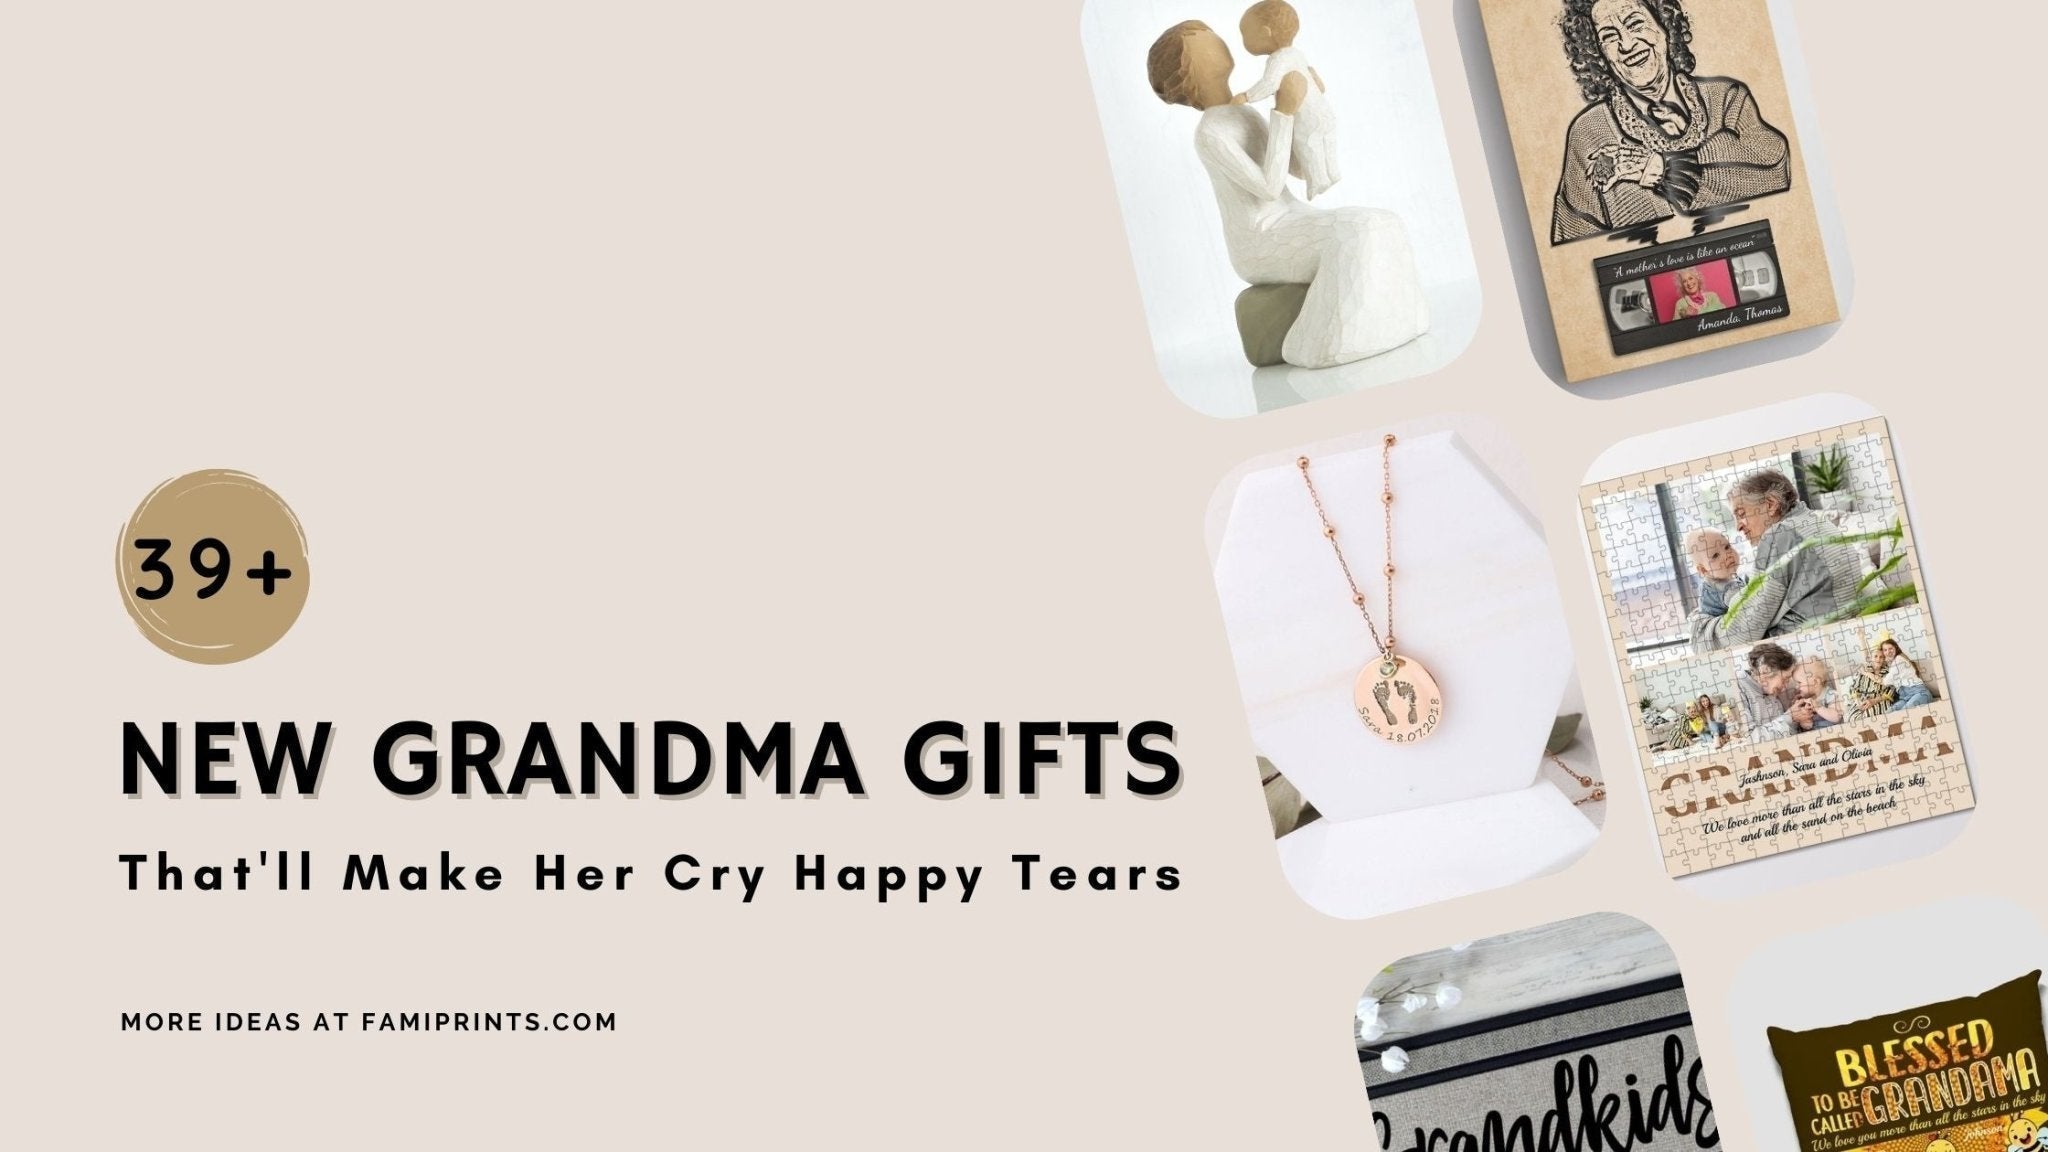 39+ Special New Grandma Gifts That'll Make Her Cry Happy Tears - FamiPrints | Trending Customizable Family Gifts